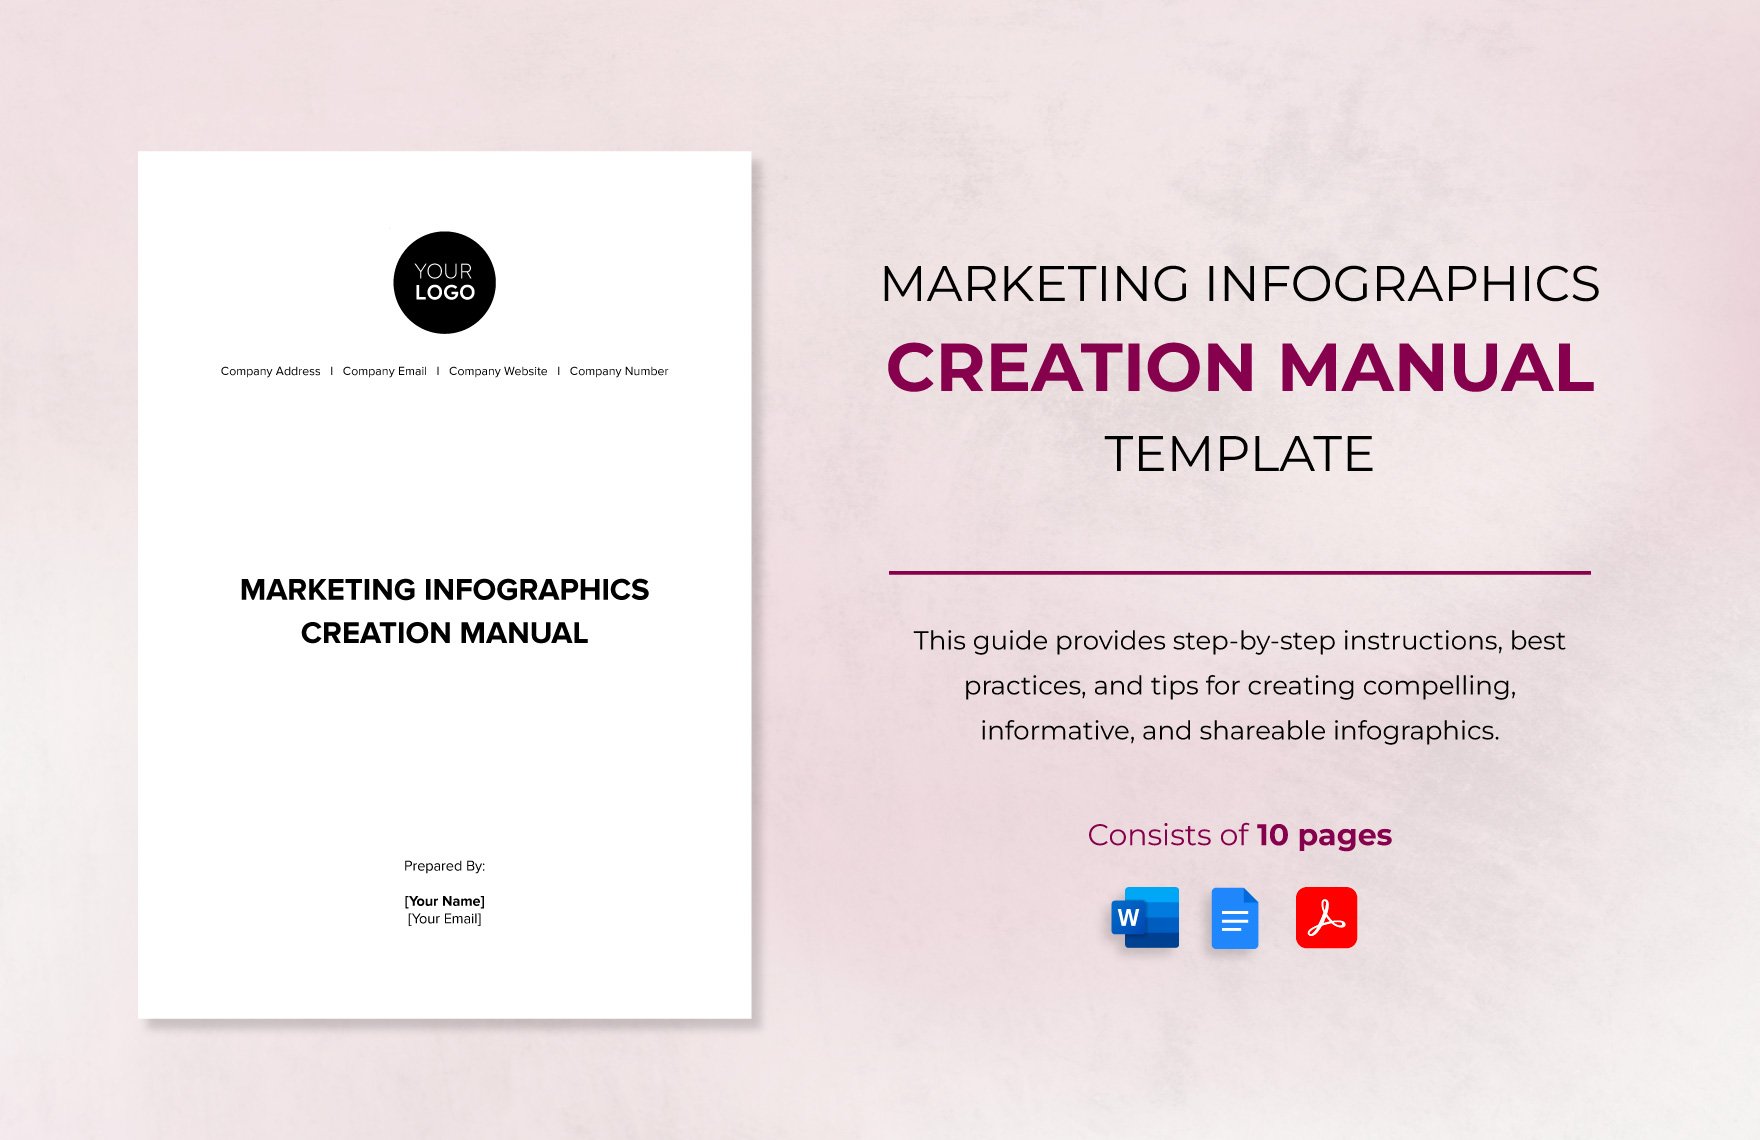 Marketing Infographics Creation Manual Template in Word, Google Docs, PDF